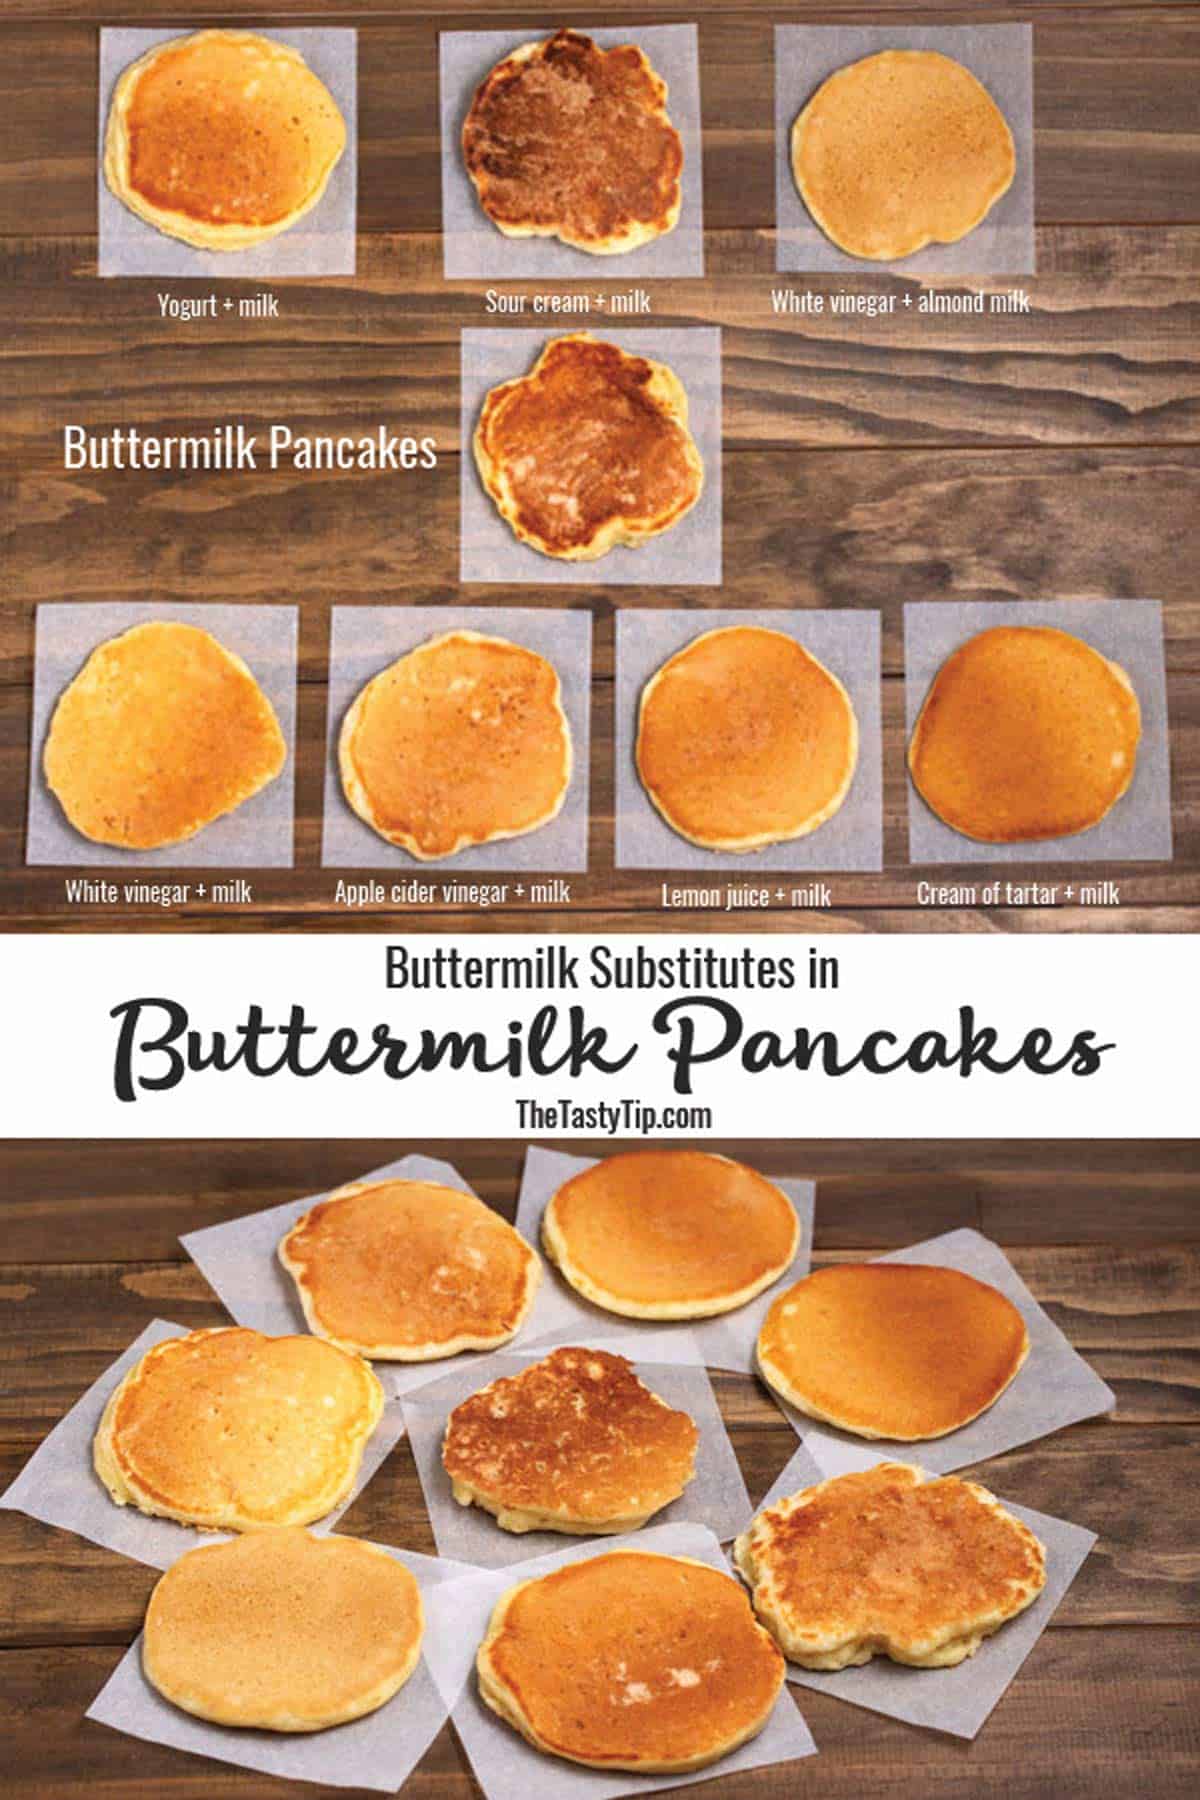 Buttermilk pancake samples made with different homemade buttermilk substitutes.